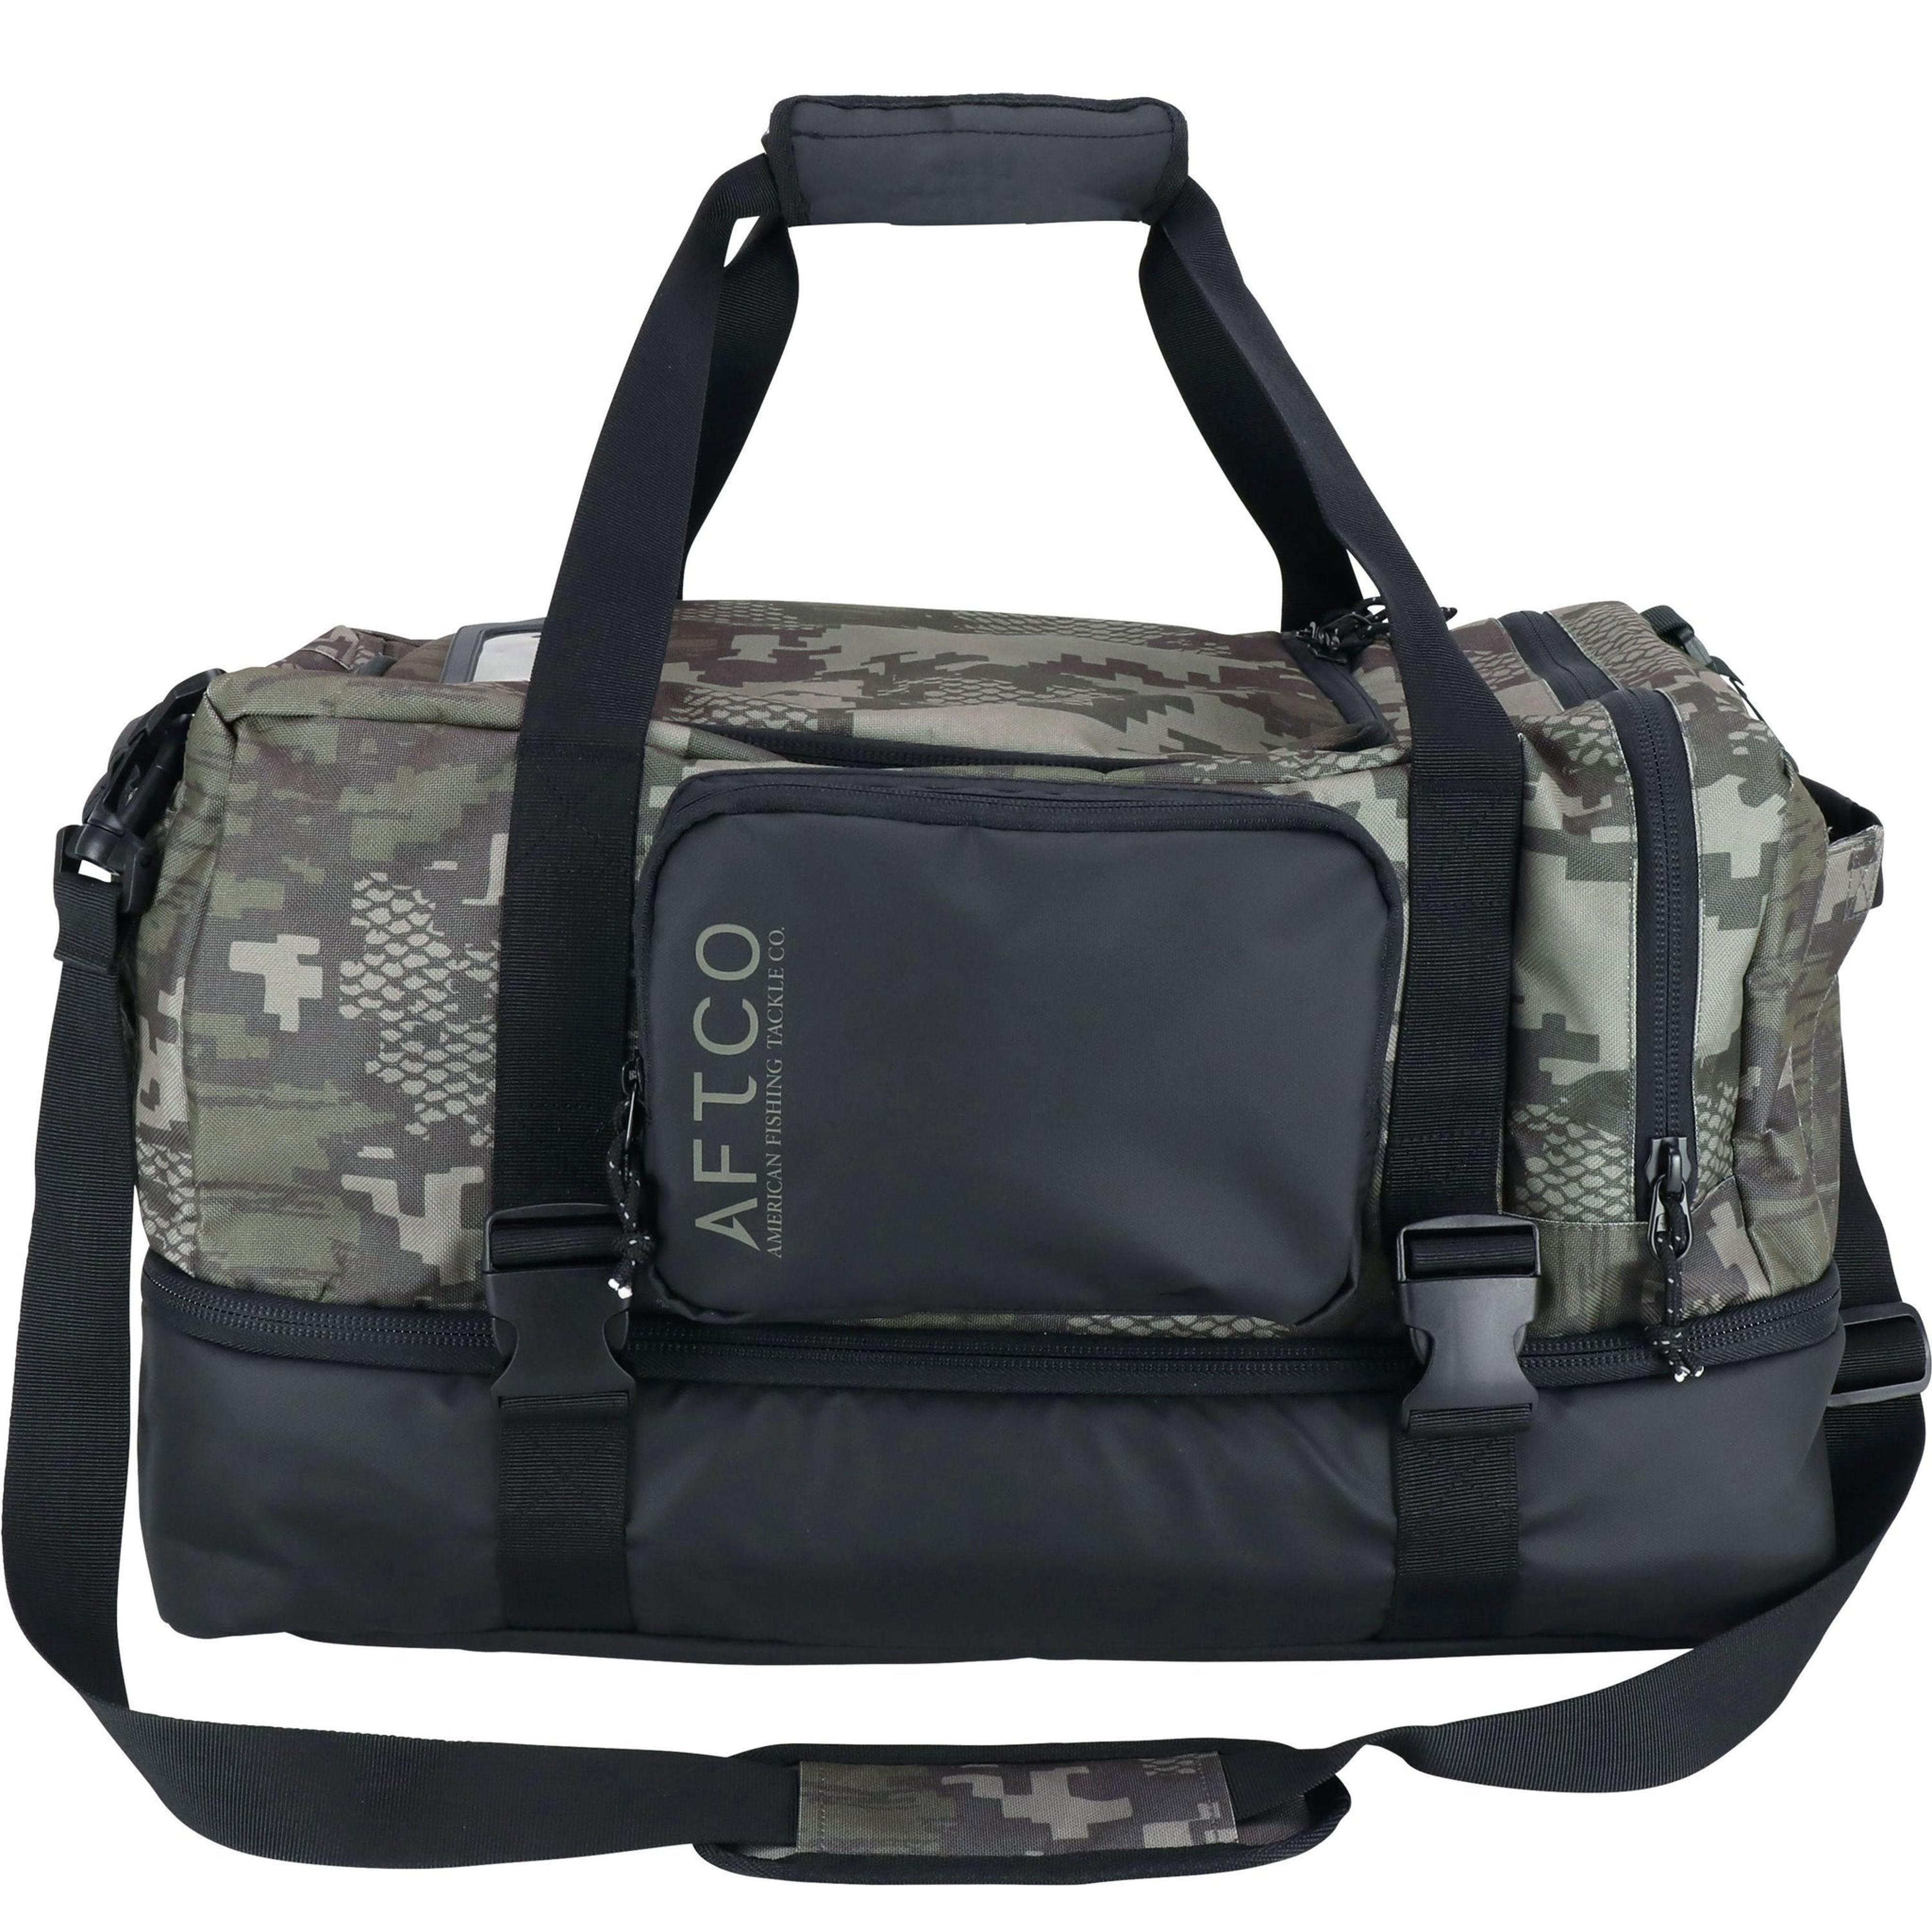 Ready 2 Fish Soft Sided Tackle Bag